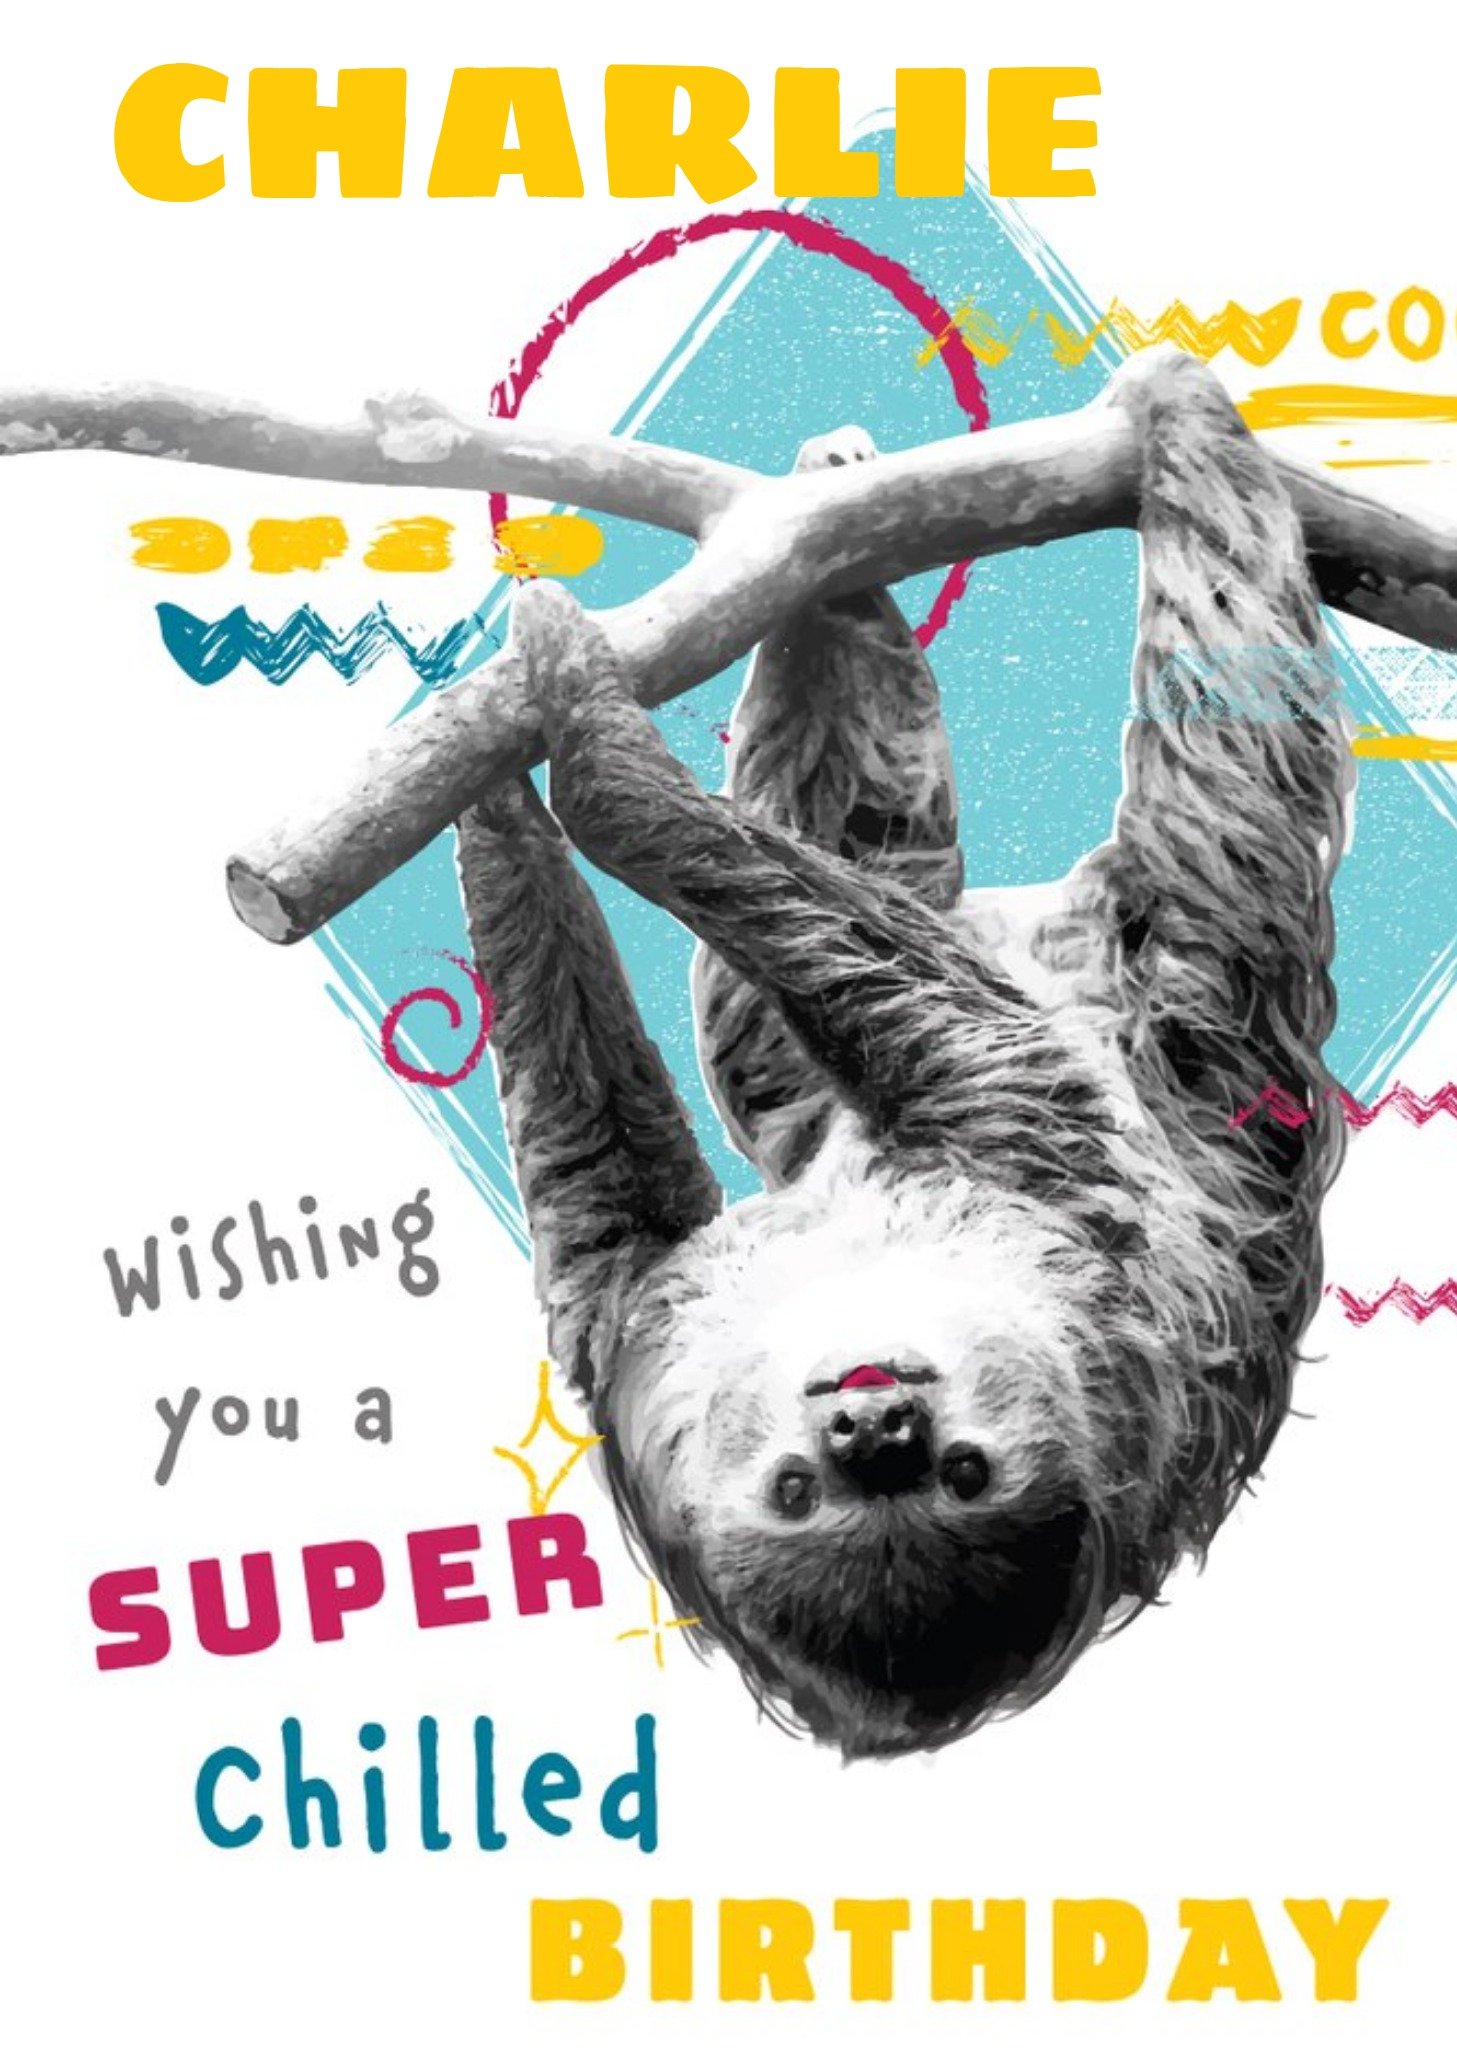 Moonpig Animal Planet Bright Graphic Illustration Of A Sloth. Wishing You A Super Chilled Birthday C